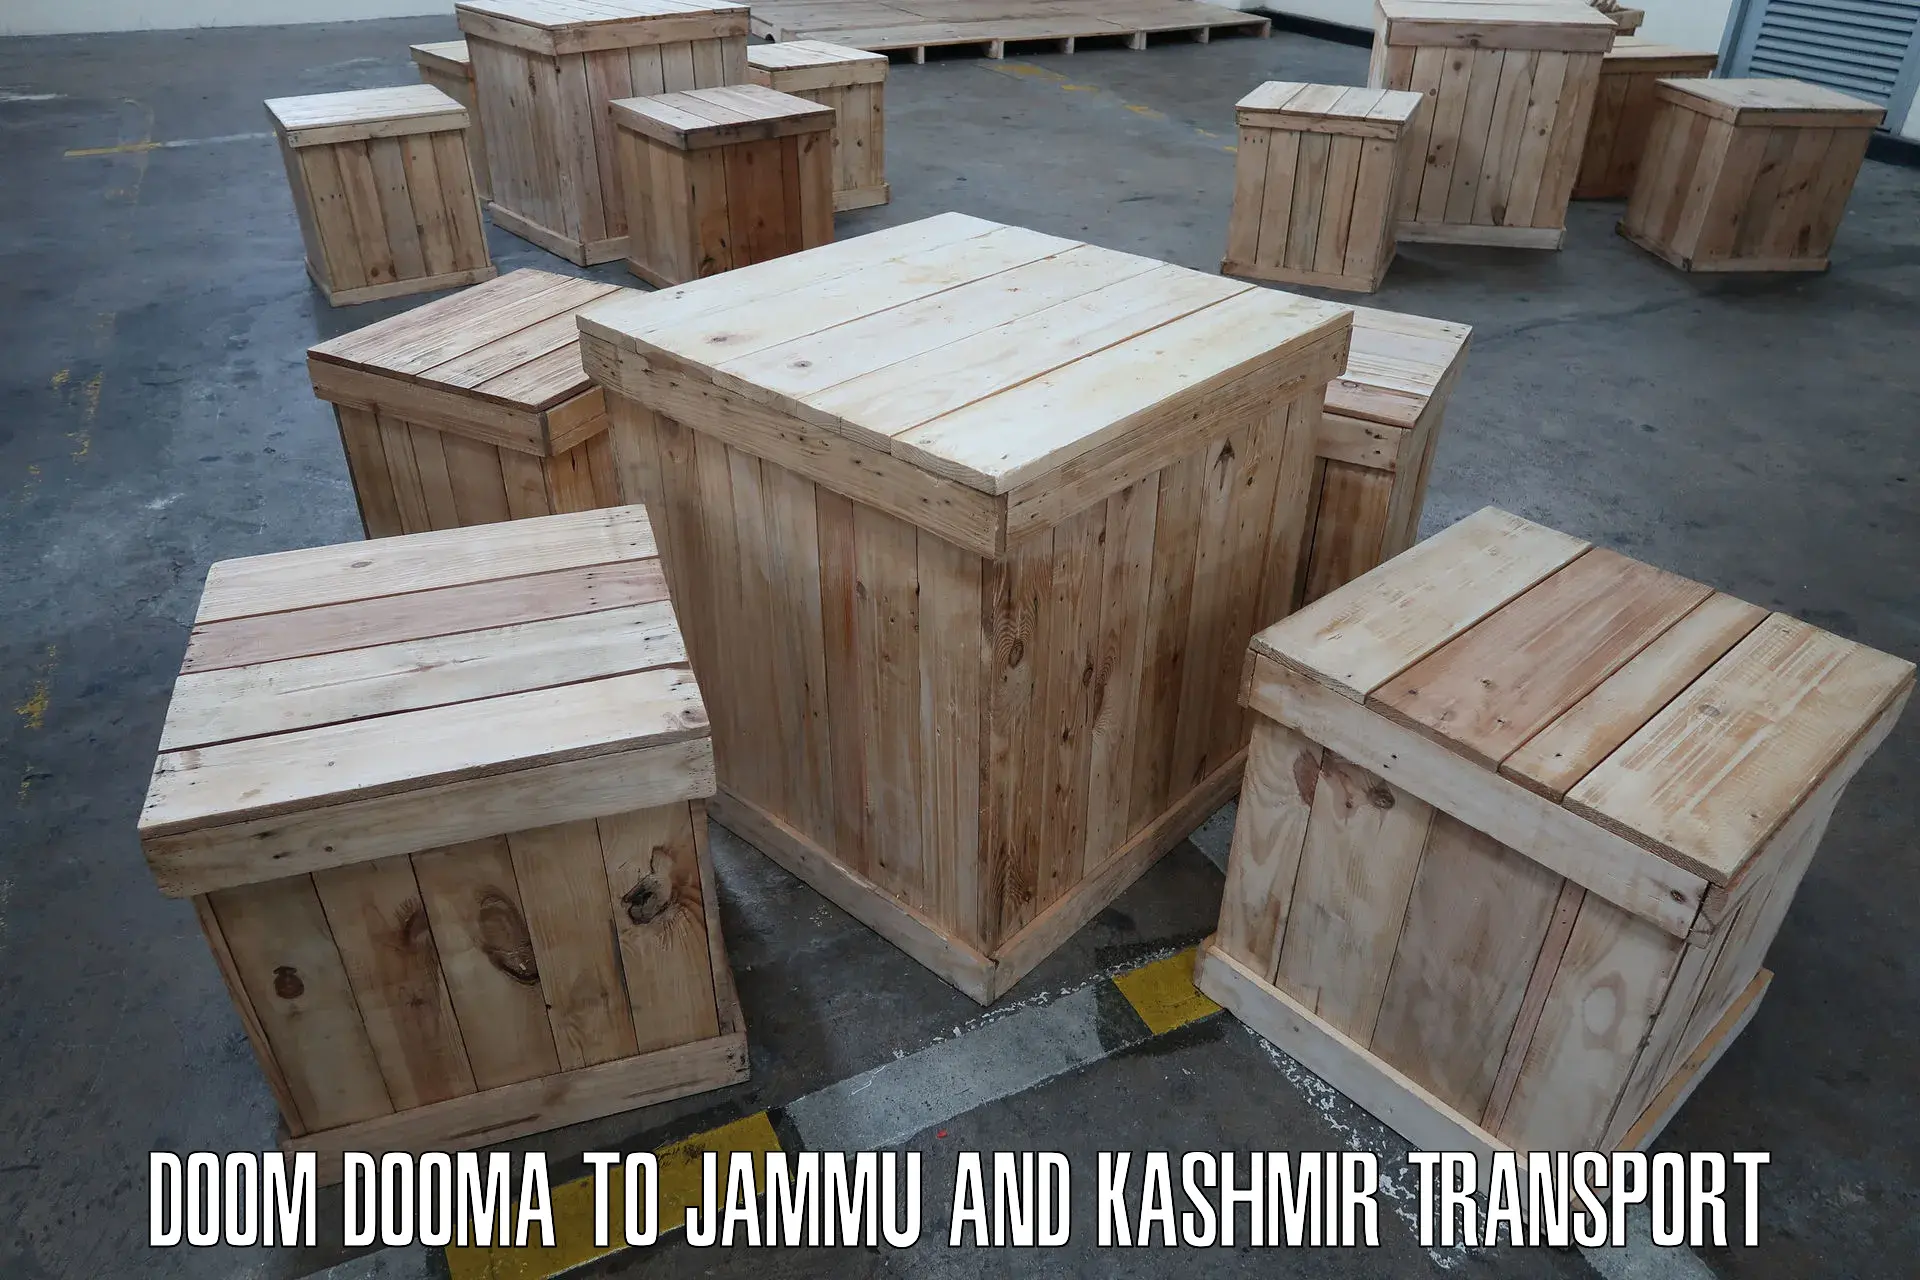 Truck transport companies in India in Doom Dooma to Jakh